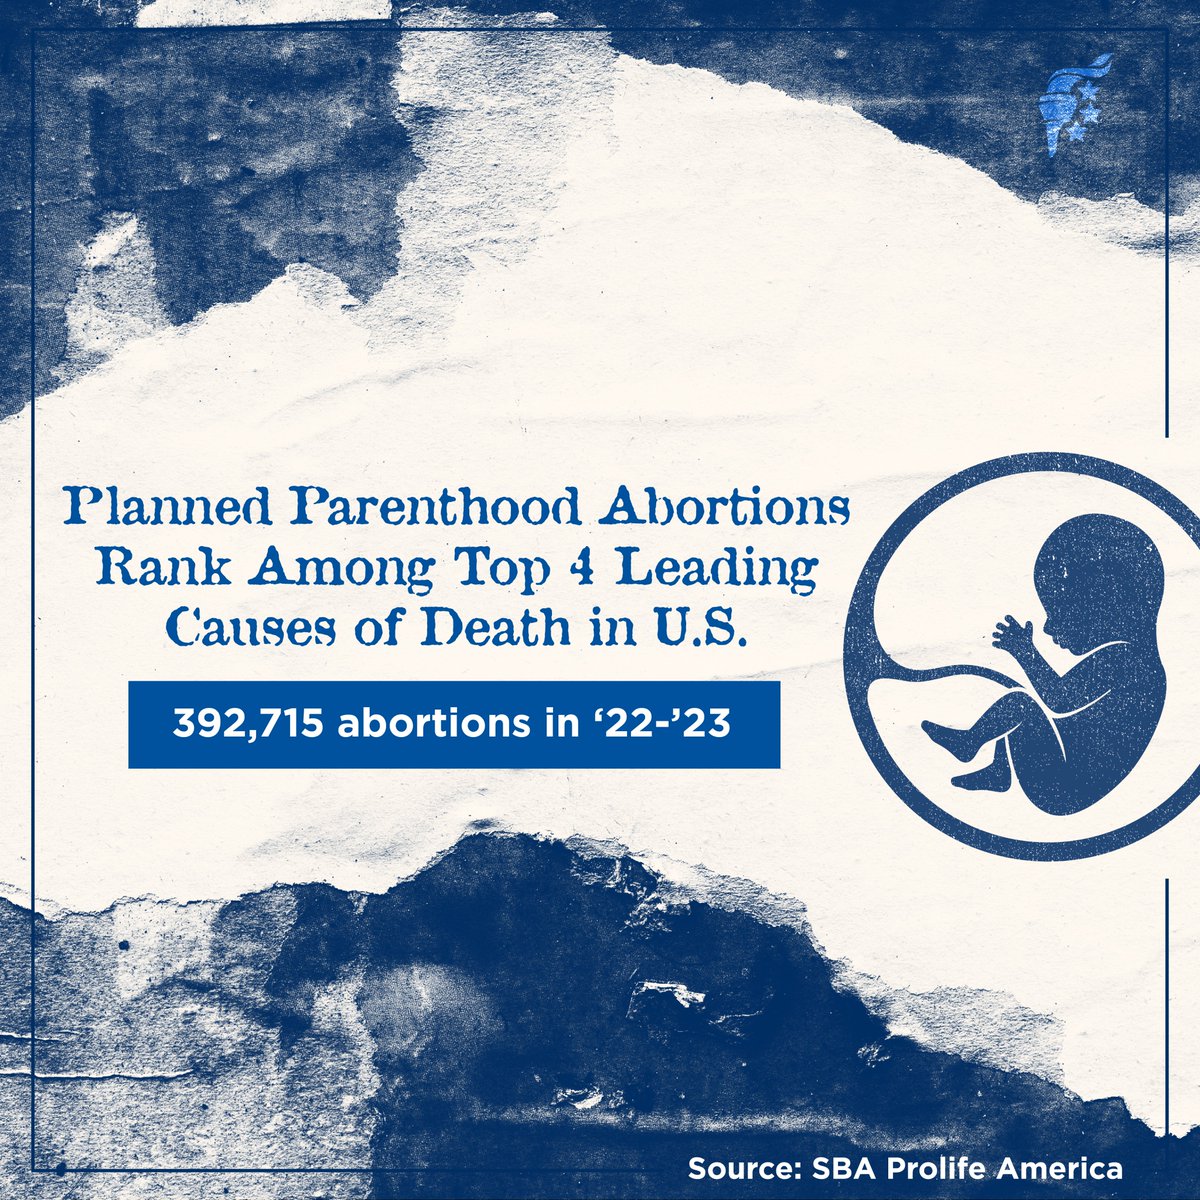 Planned Parenthood committed nearly 400,000 abortions from the beginning of 2022 until the end of 2023, making abortion rank in the top four leading causes of death in the U.S. during that time. Pray for an end to abortion. @sbaprolife